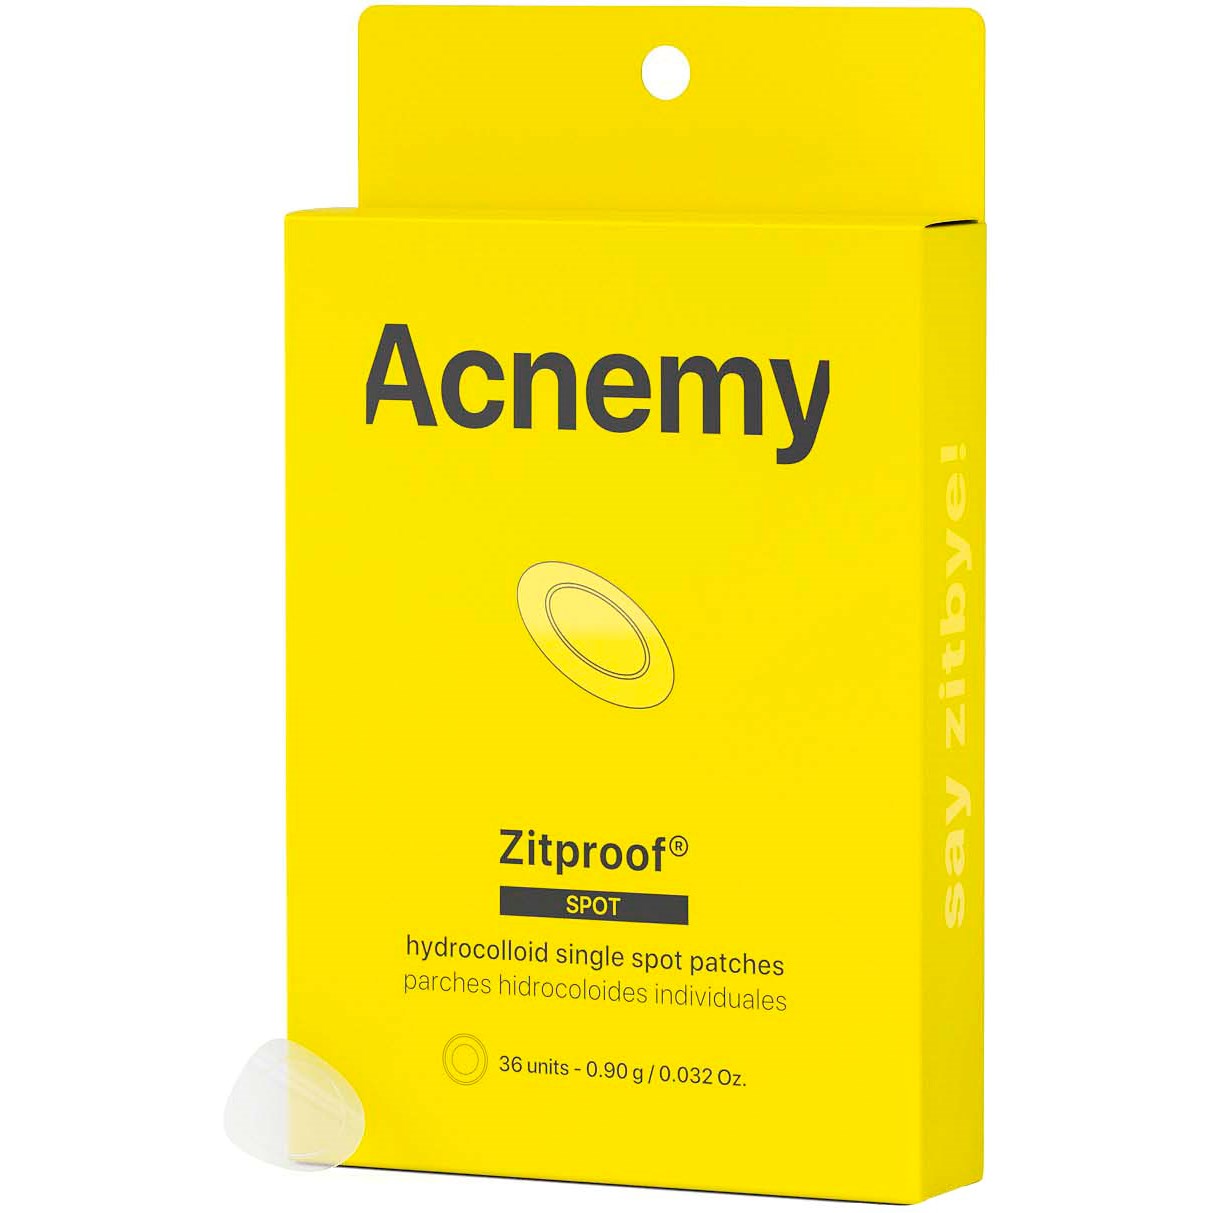 Acnemy Zitproof Spot 36 Patches